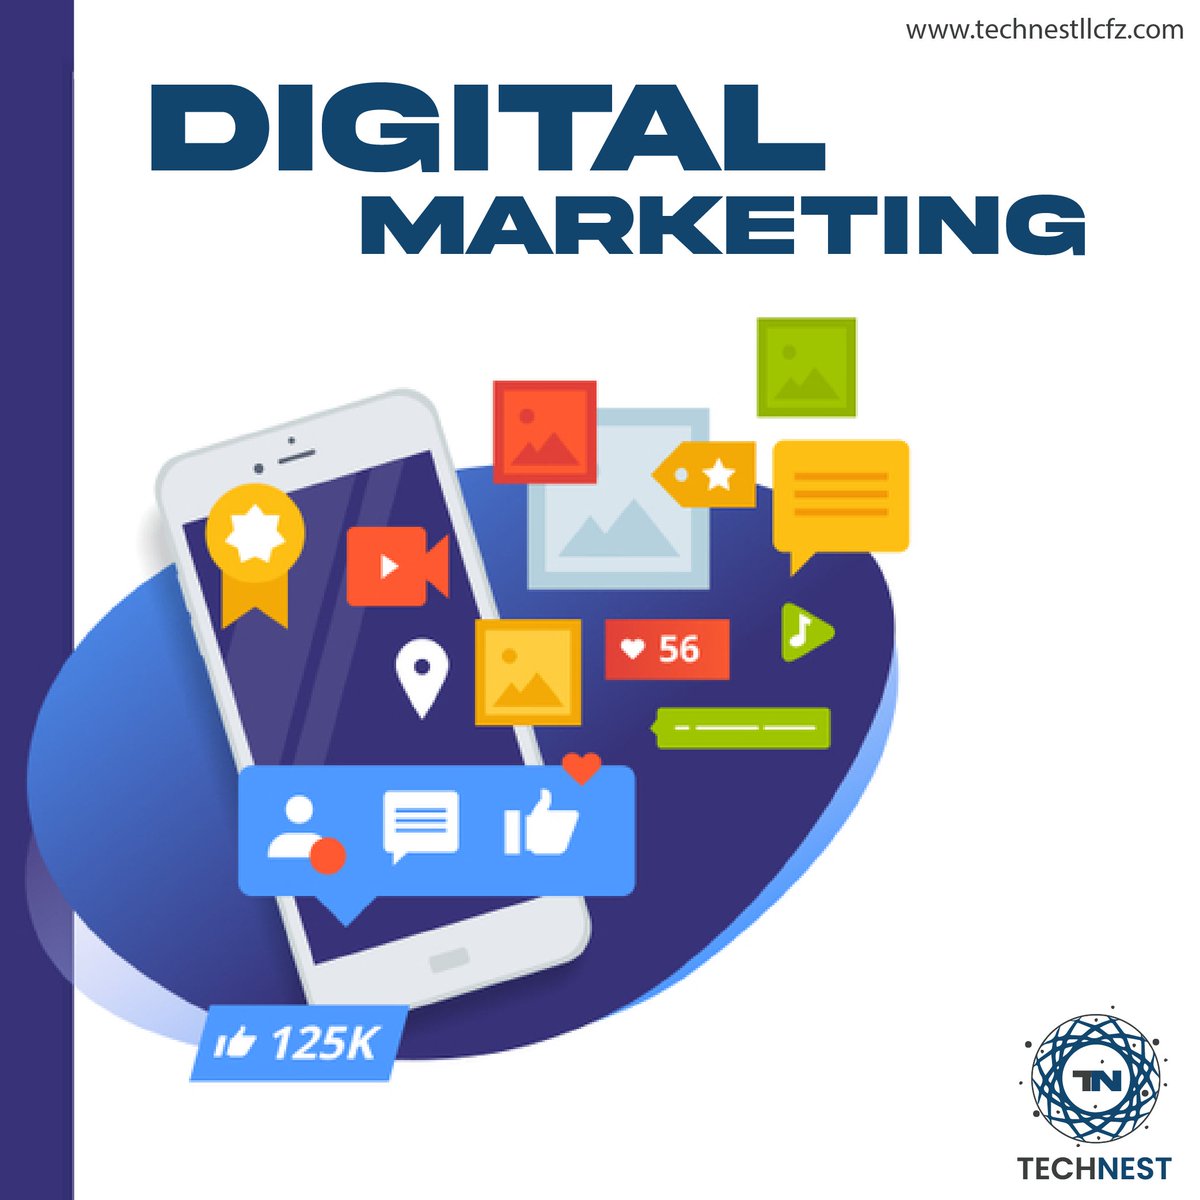 Transform your business with our comprehensive digital marketing services. From crafting innovative strategies to executing targeted campaigns, we are here to help you reach your goals in the digital realm. 
.
.
#digitalmarketing #technestllcfz #seo